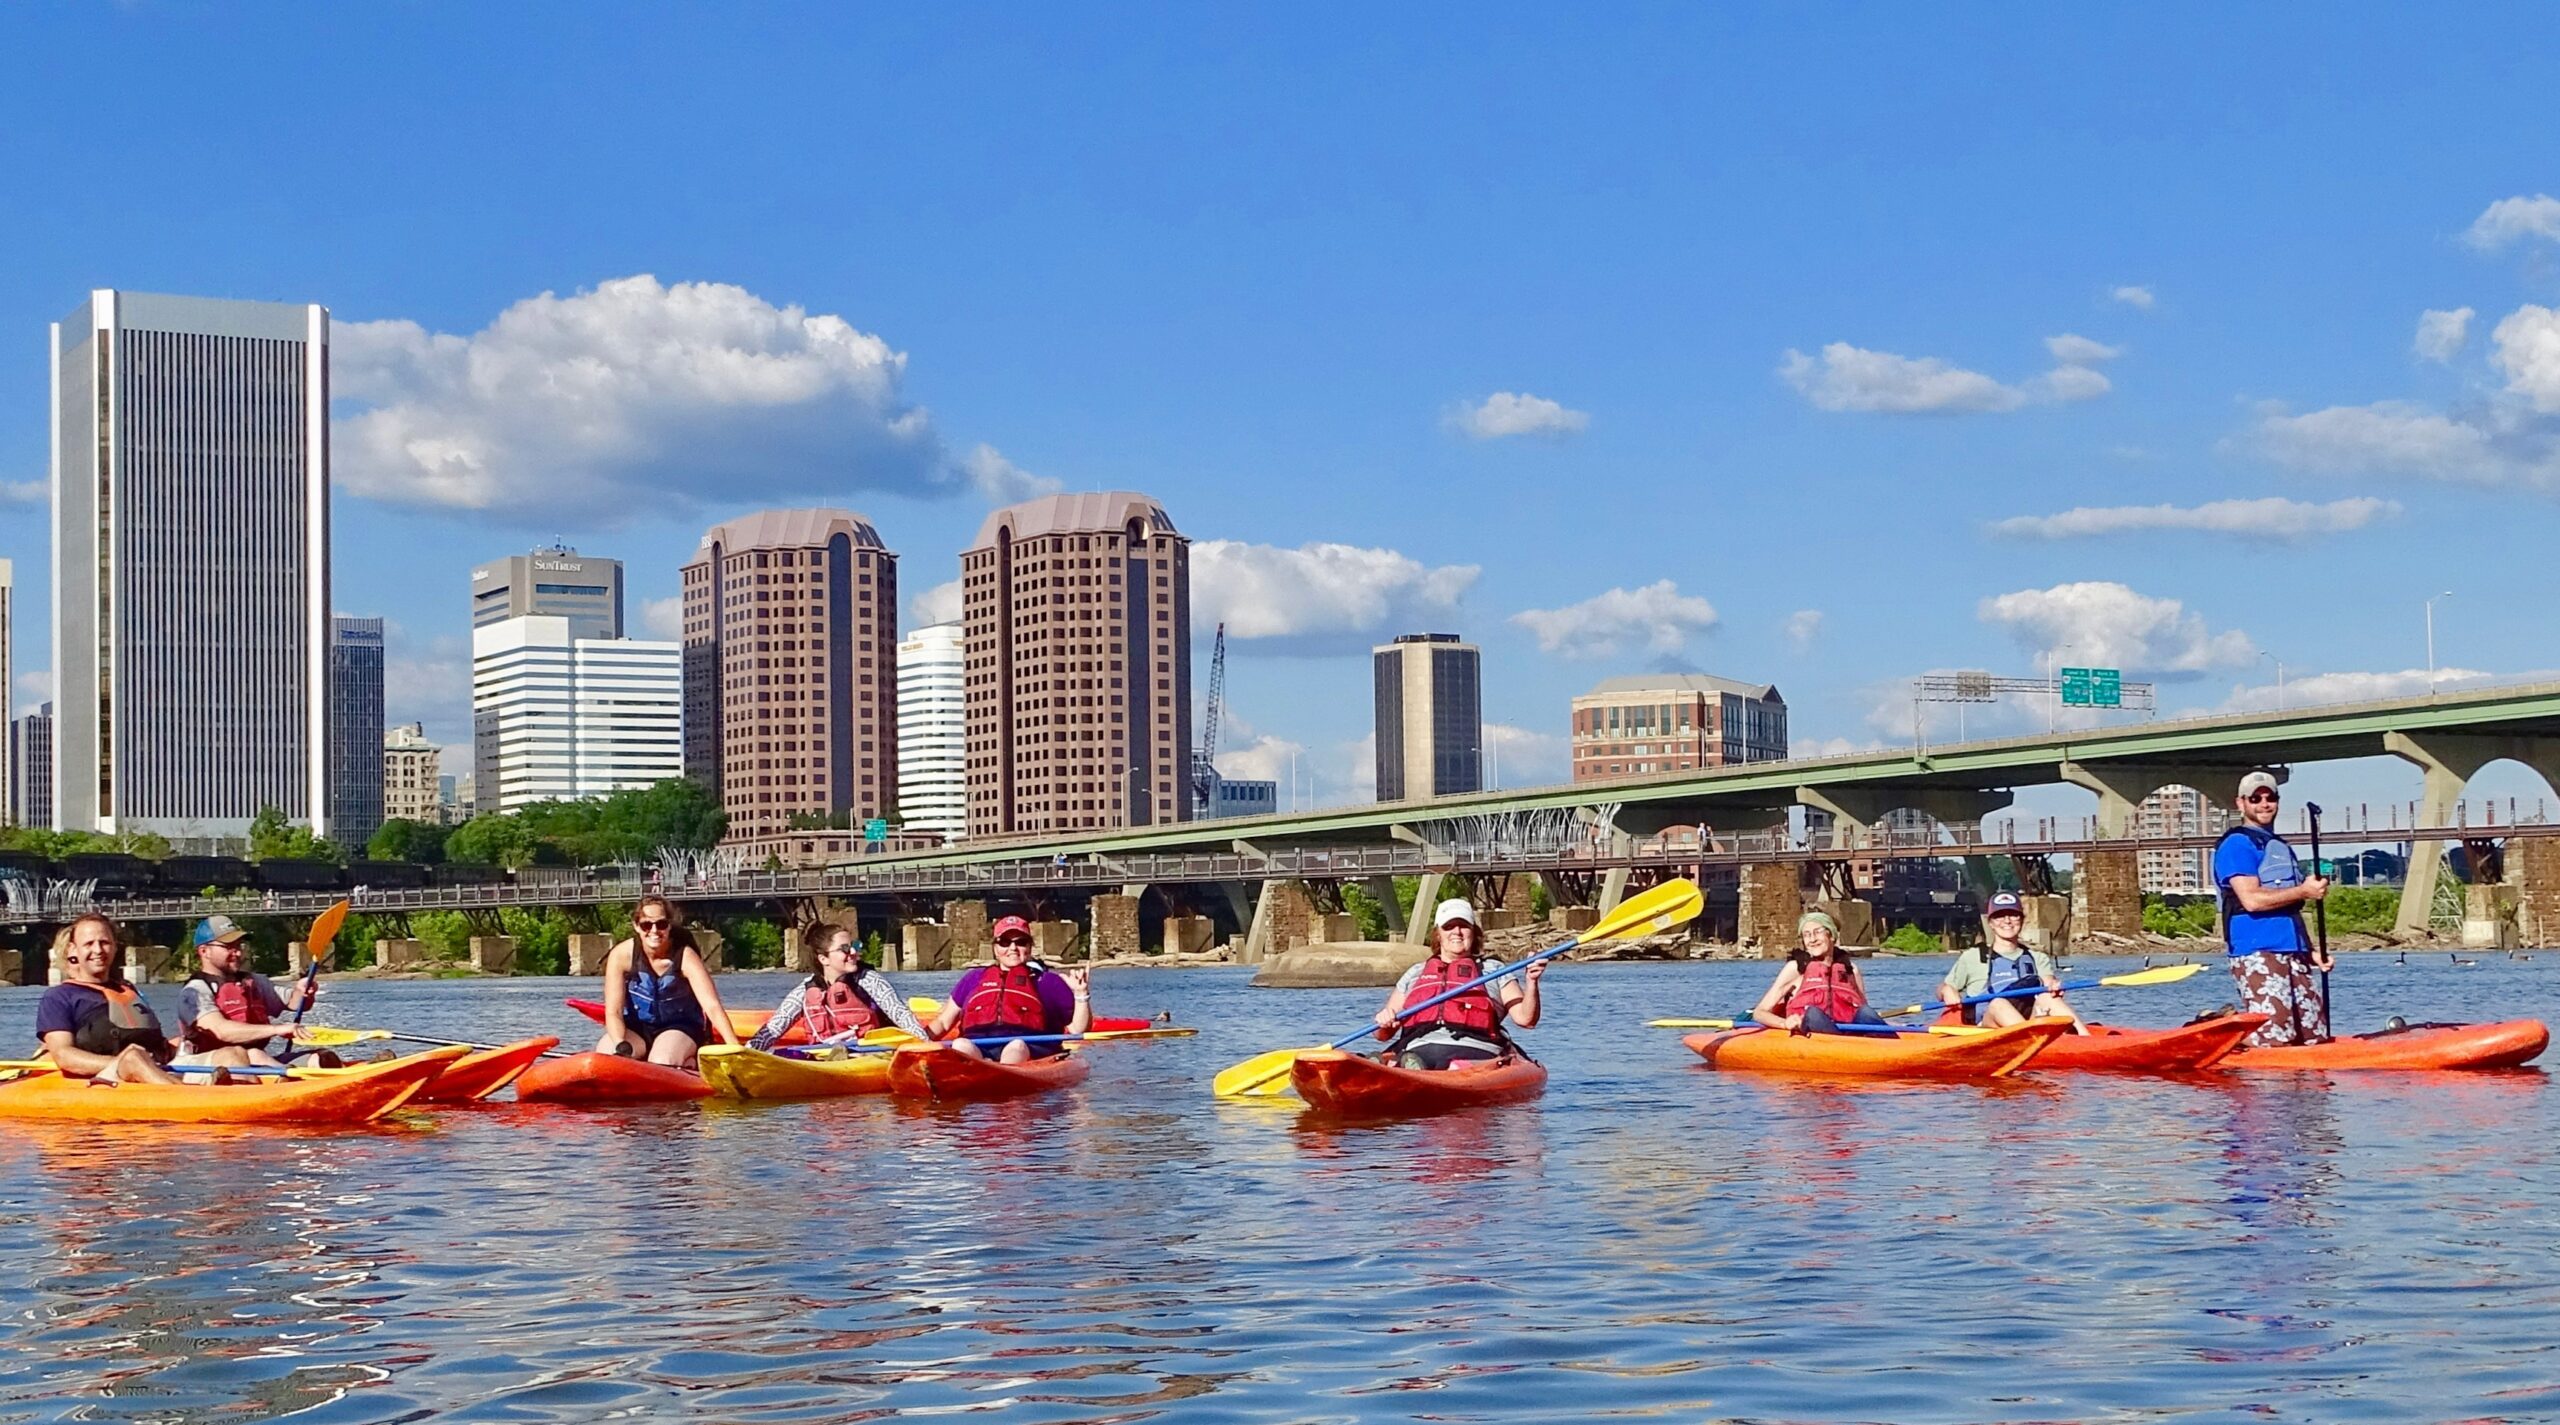 Group of people kayaking on the James River in Richmond